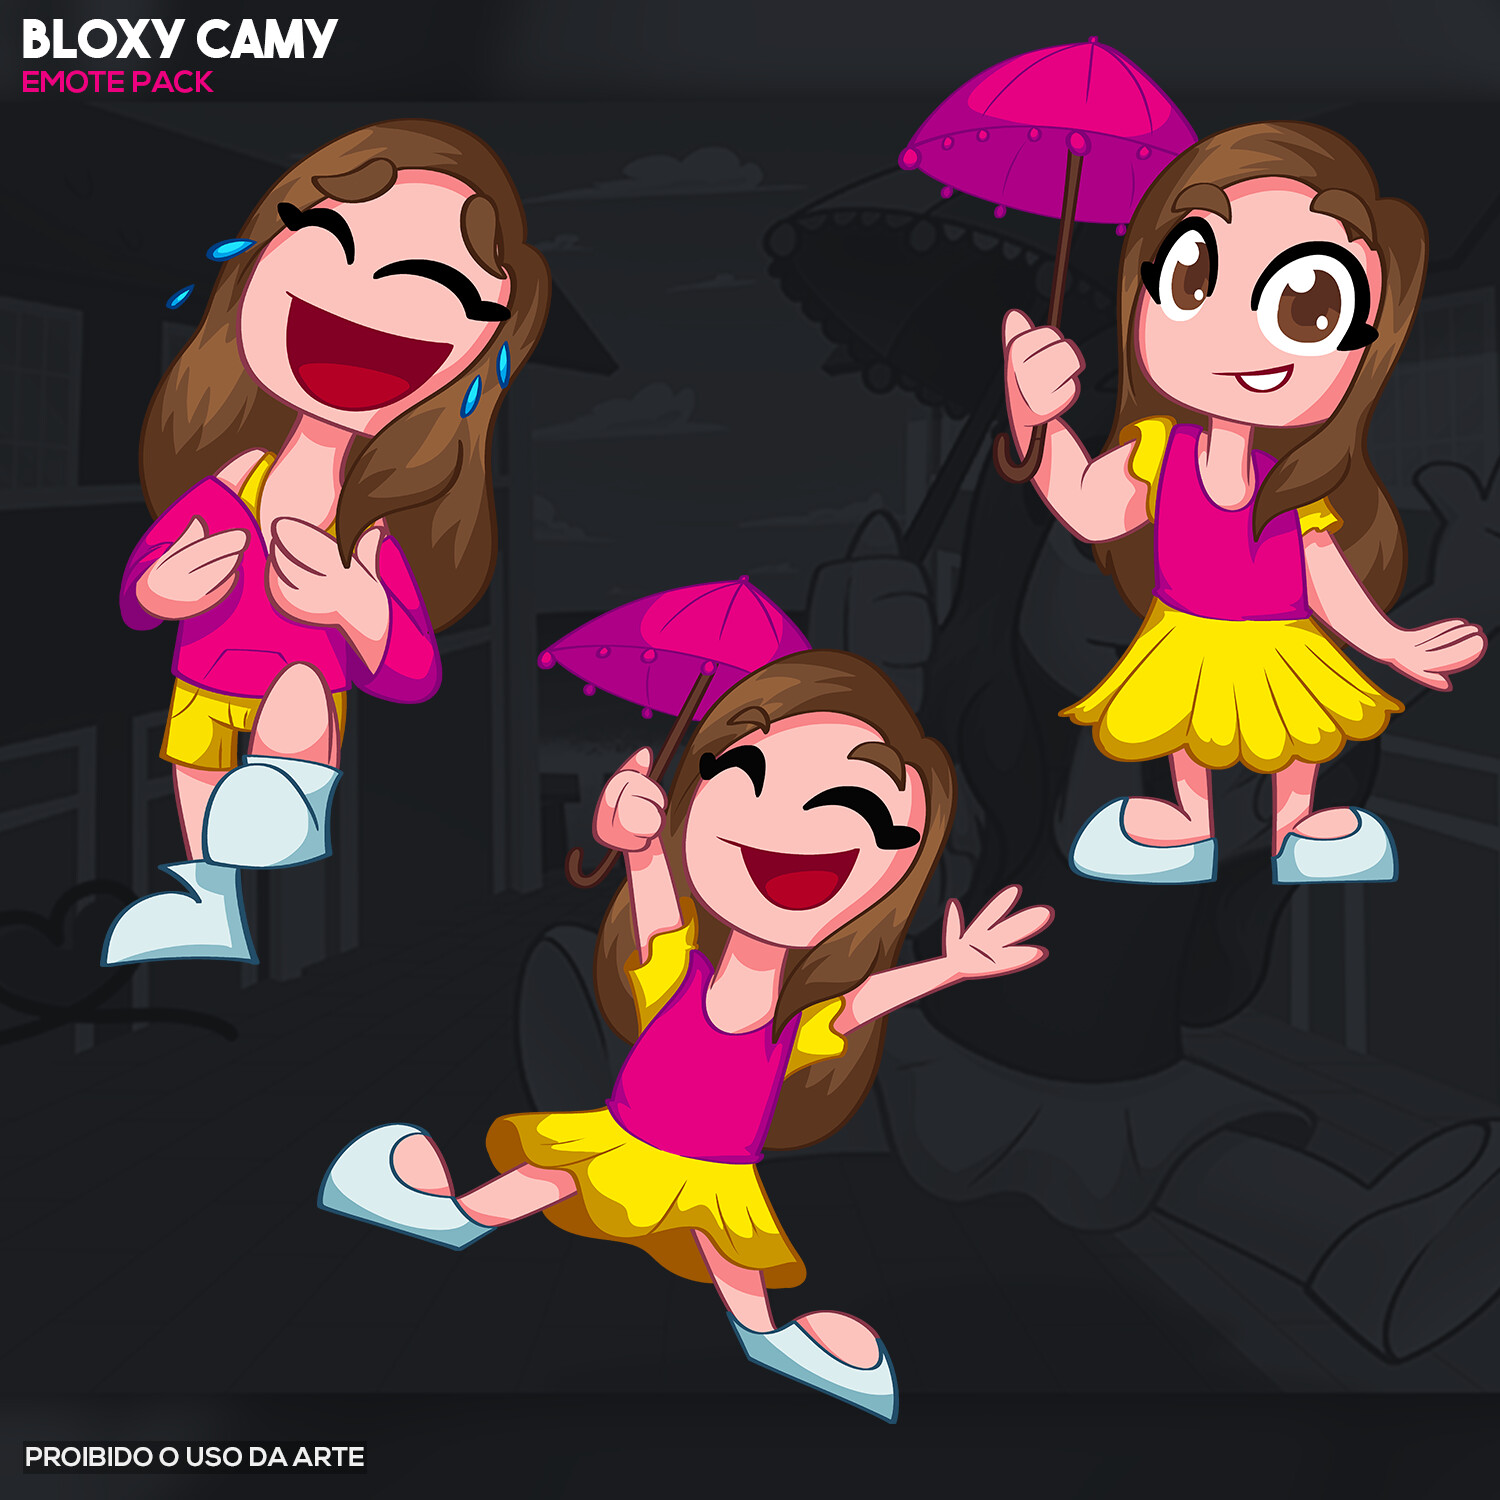 FOTO PERFIL - Lilly Blox (Canal Infantil Roblox) by VicTycoon on DeviantArt